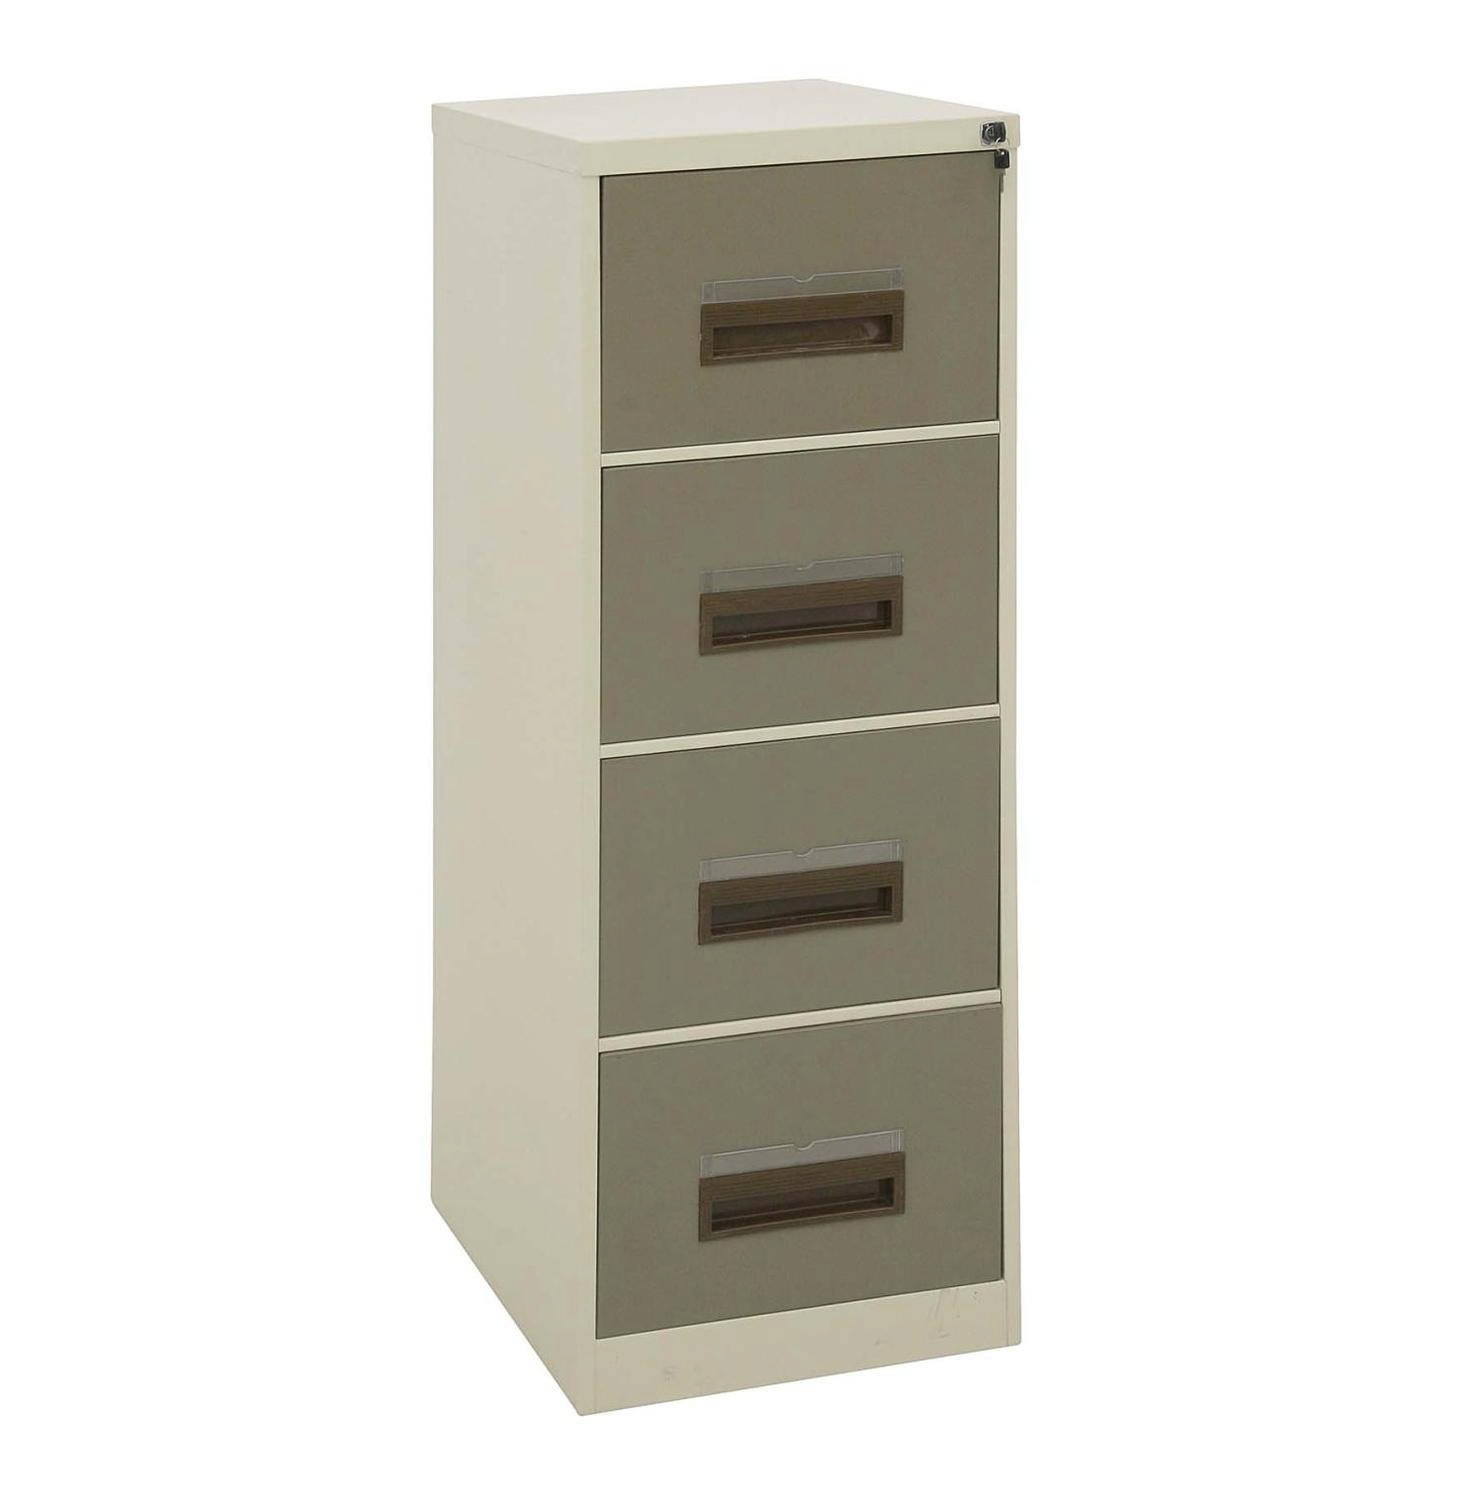 File Cabinets Astounding 4 Drawer File Cabinet Metal Wardrobe for dimensions 1460 X 1500